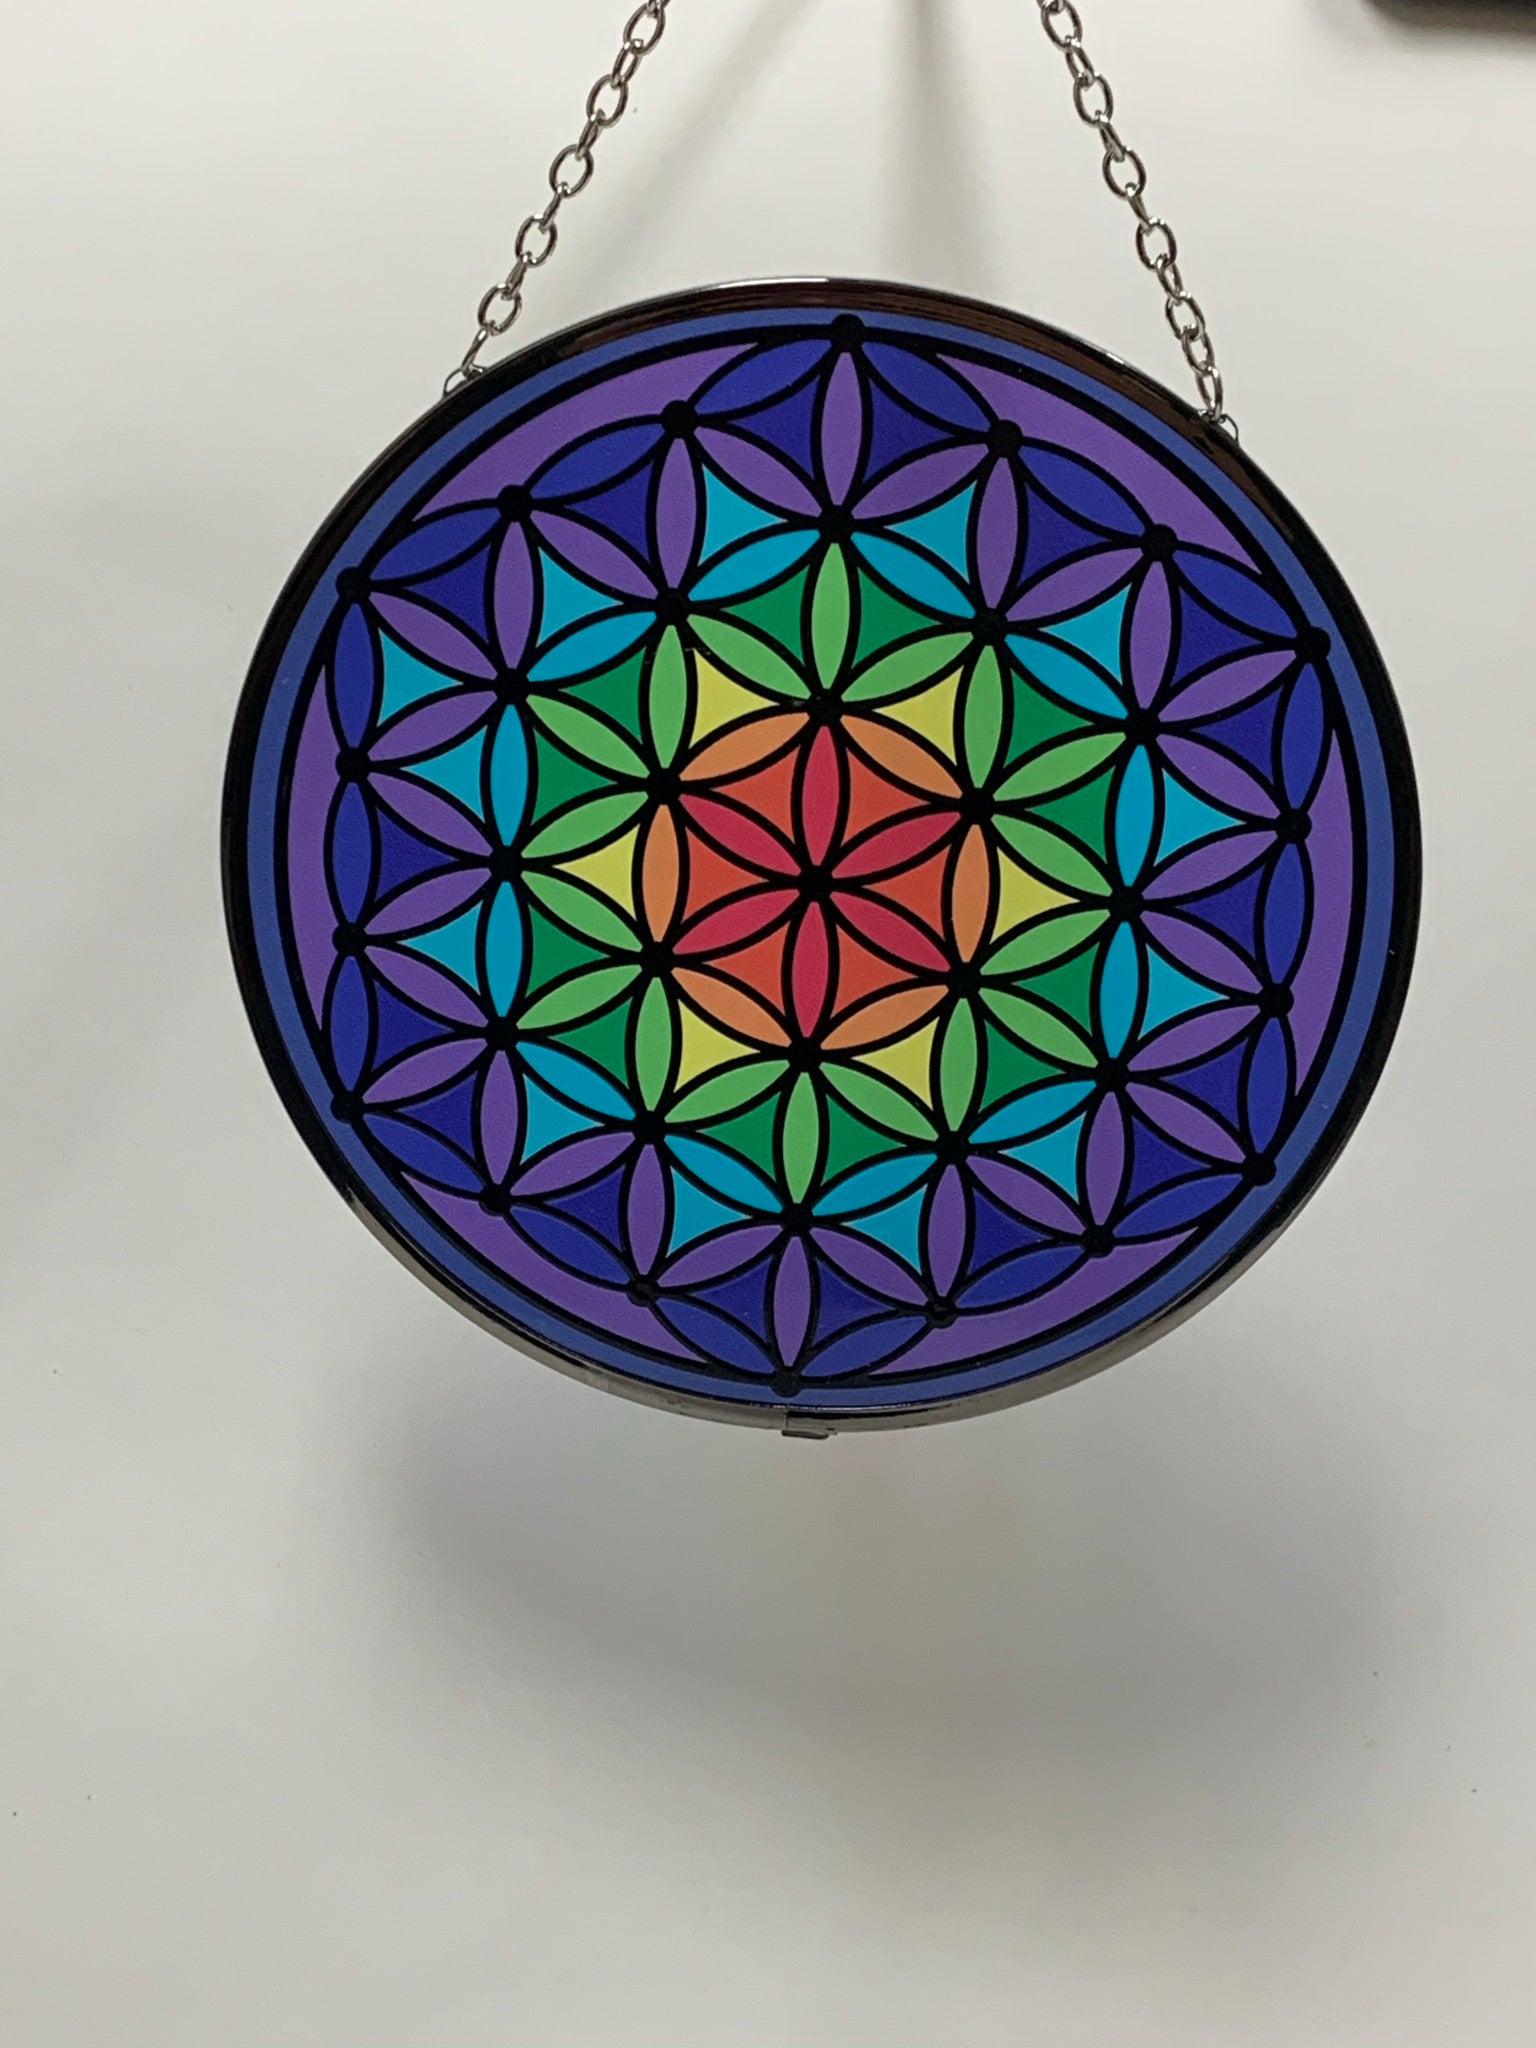 Round, glass flower of life suncatcher in the colors of the rainbow moving from the center (red) to the edge (purple). The already vibrant color is enhanced when the sun's rays stream through it. Beauty and spiritual meaning - nice combo! Comes with a chain for hanging and a suction cup, with a hook,  to hold it.